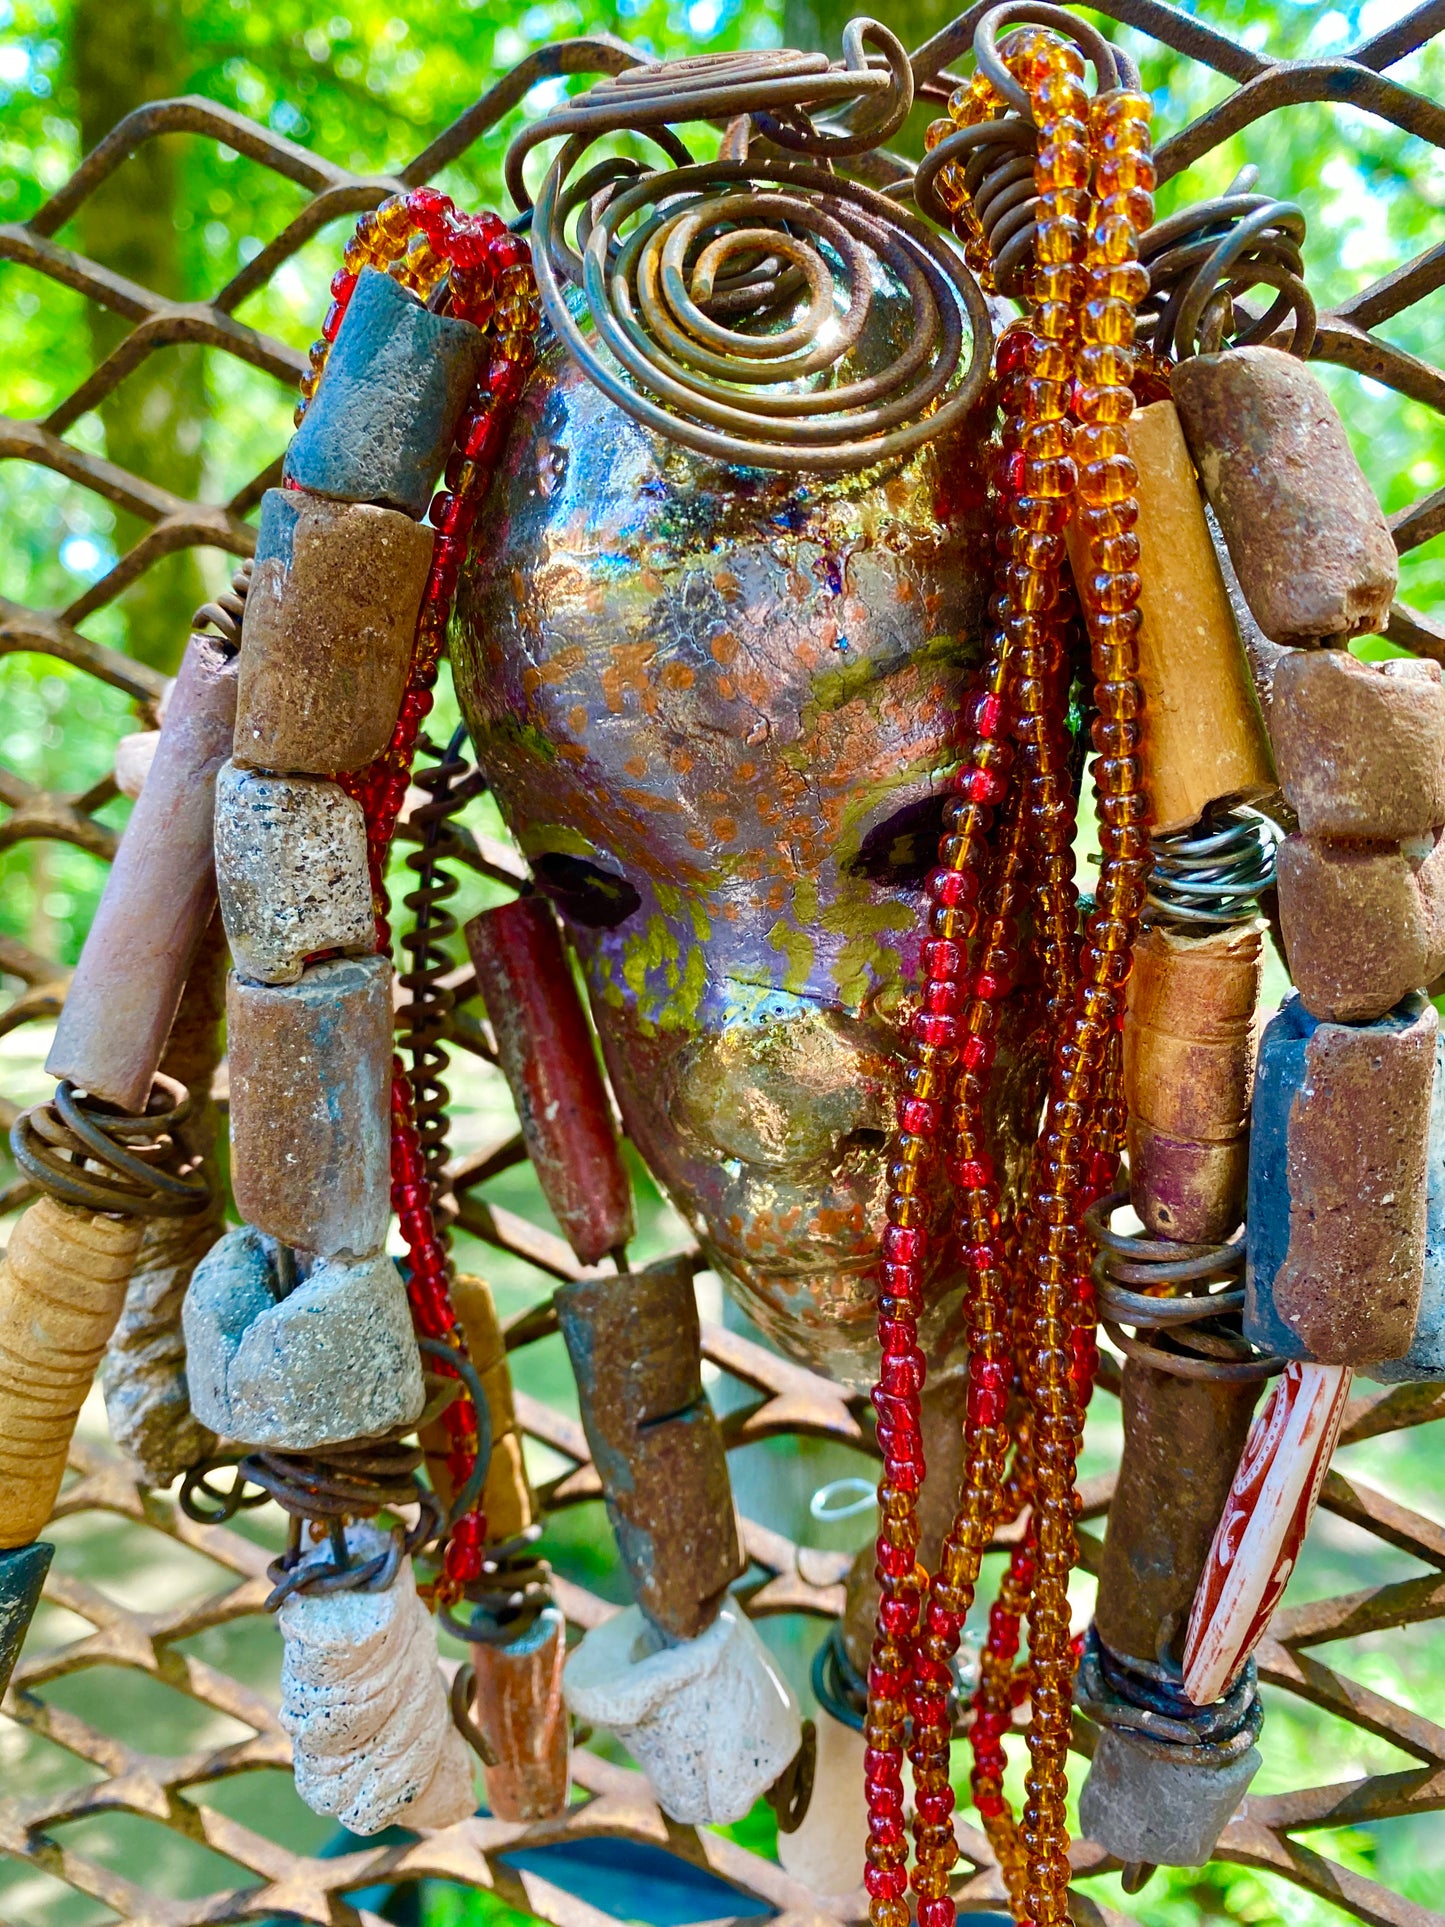 I started making mask soon after seeing authentic African artwork at the Smithsonian Museum of African Art. I was in total awe. Makeda means she who discovers the soul of others and things was inspired by my visit there.  Makeda has a two tone  metallic copper gold complexion. She is 7" x 5" and weighs 1lbs. Makeda has  over 20 handmade raku fired beads. She has over 100 mini amber and red beads twisted as hair. Makeda has over 10 feet of  copper coiled 16 gauge wire hair.